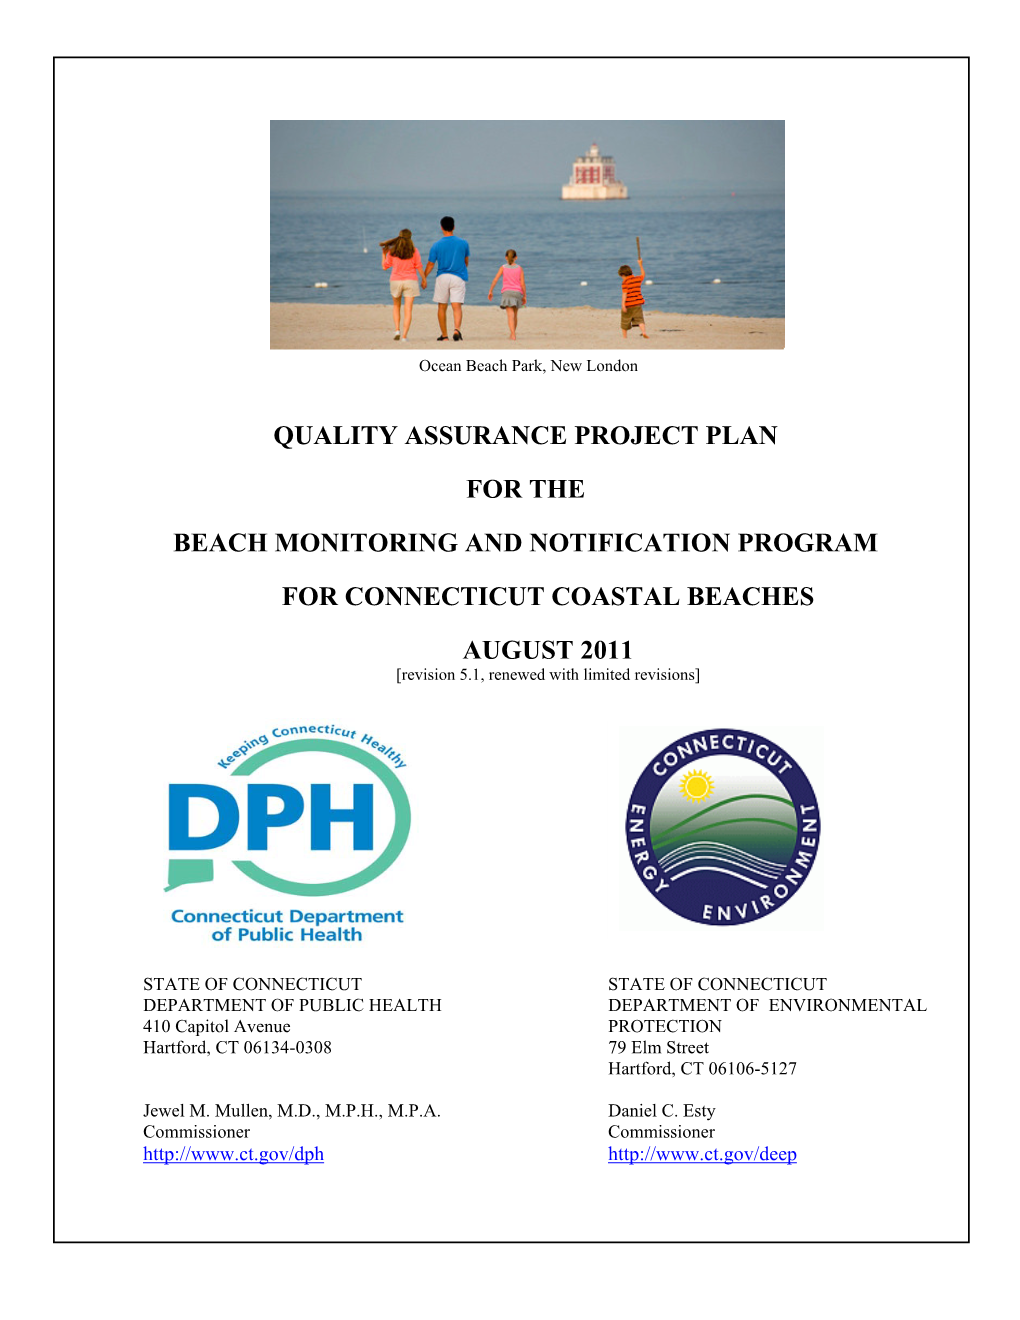 Quality Assurance Project Plan for the Beach